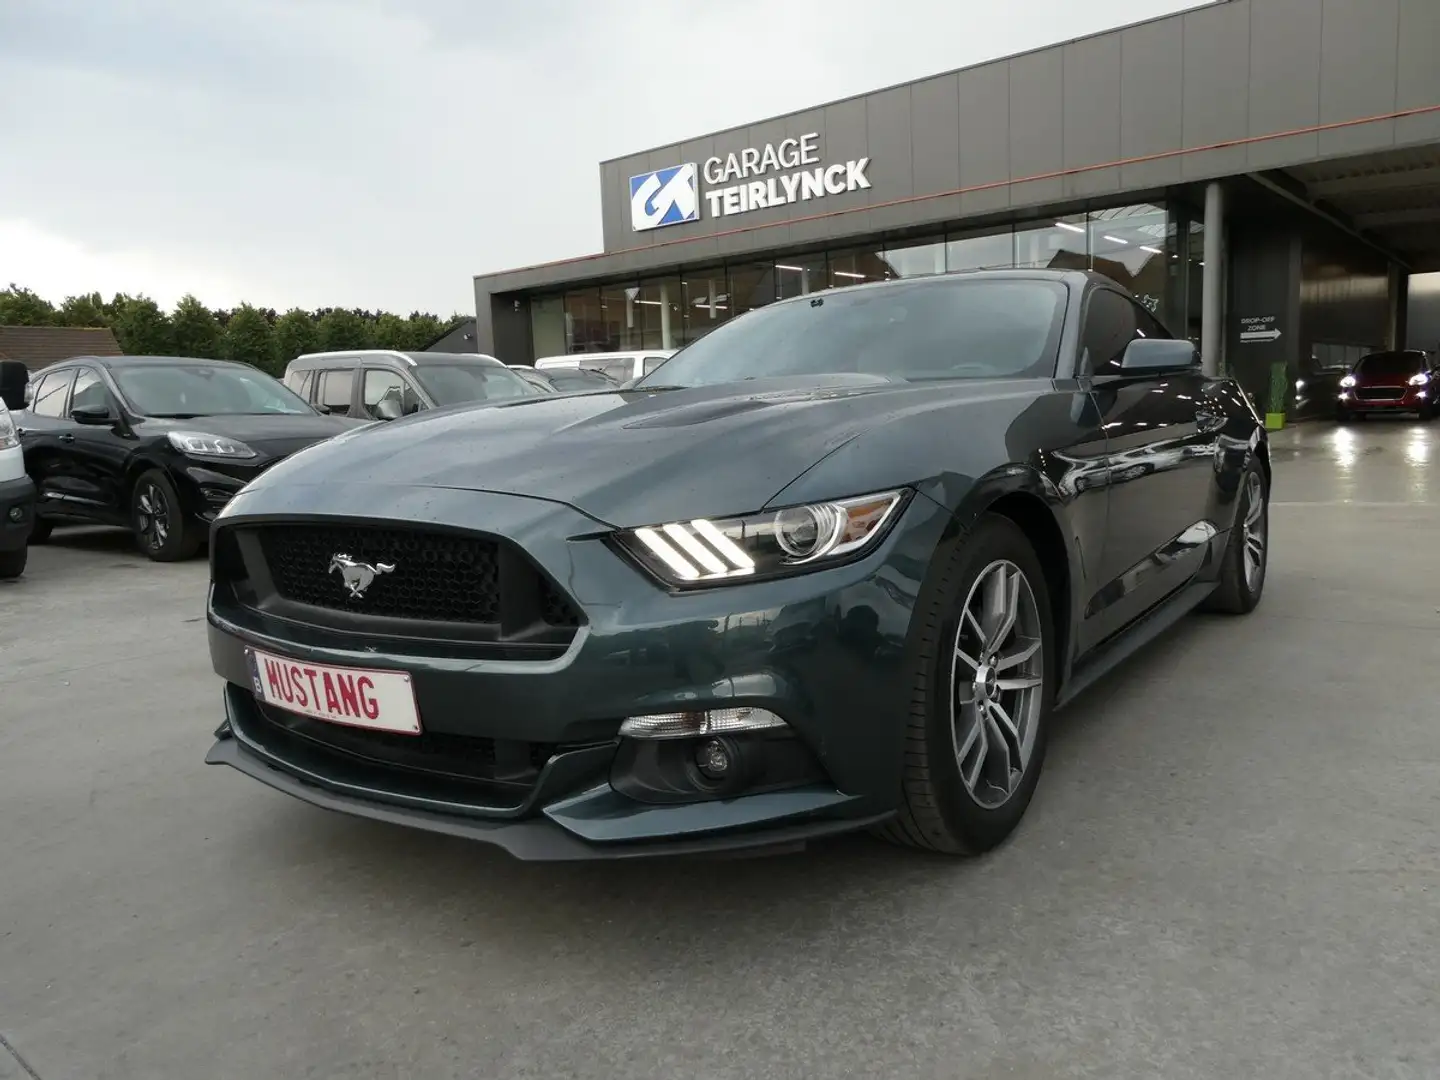 Ford Mustang Coupe Automaat 2.3 i 317pk '15 33000km (48593) Grün - 2